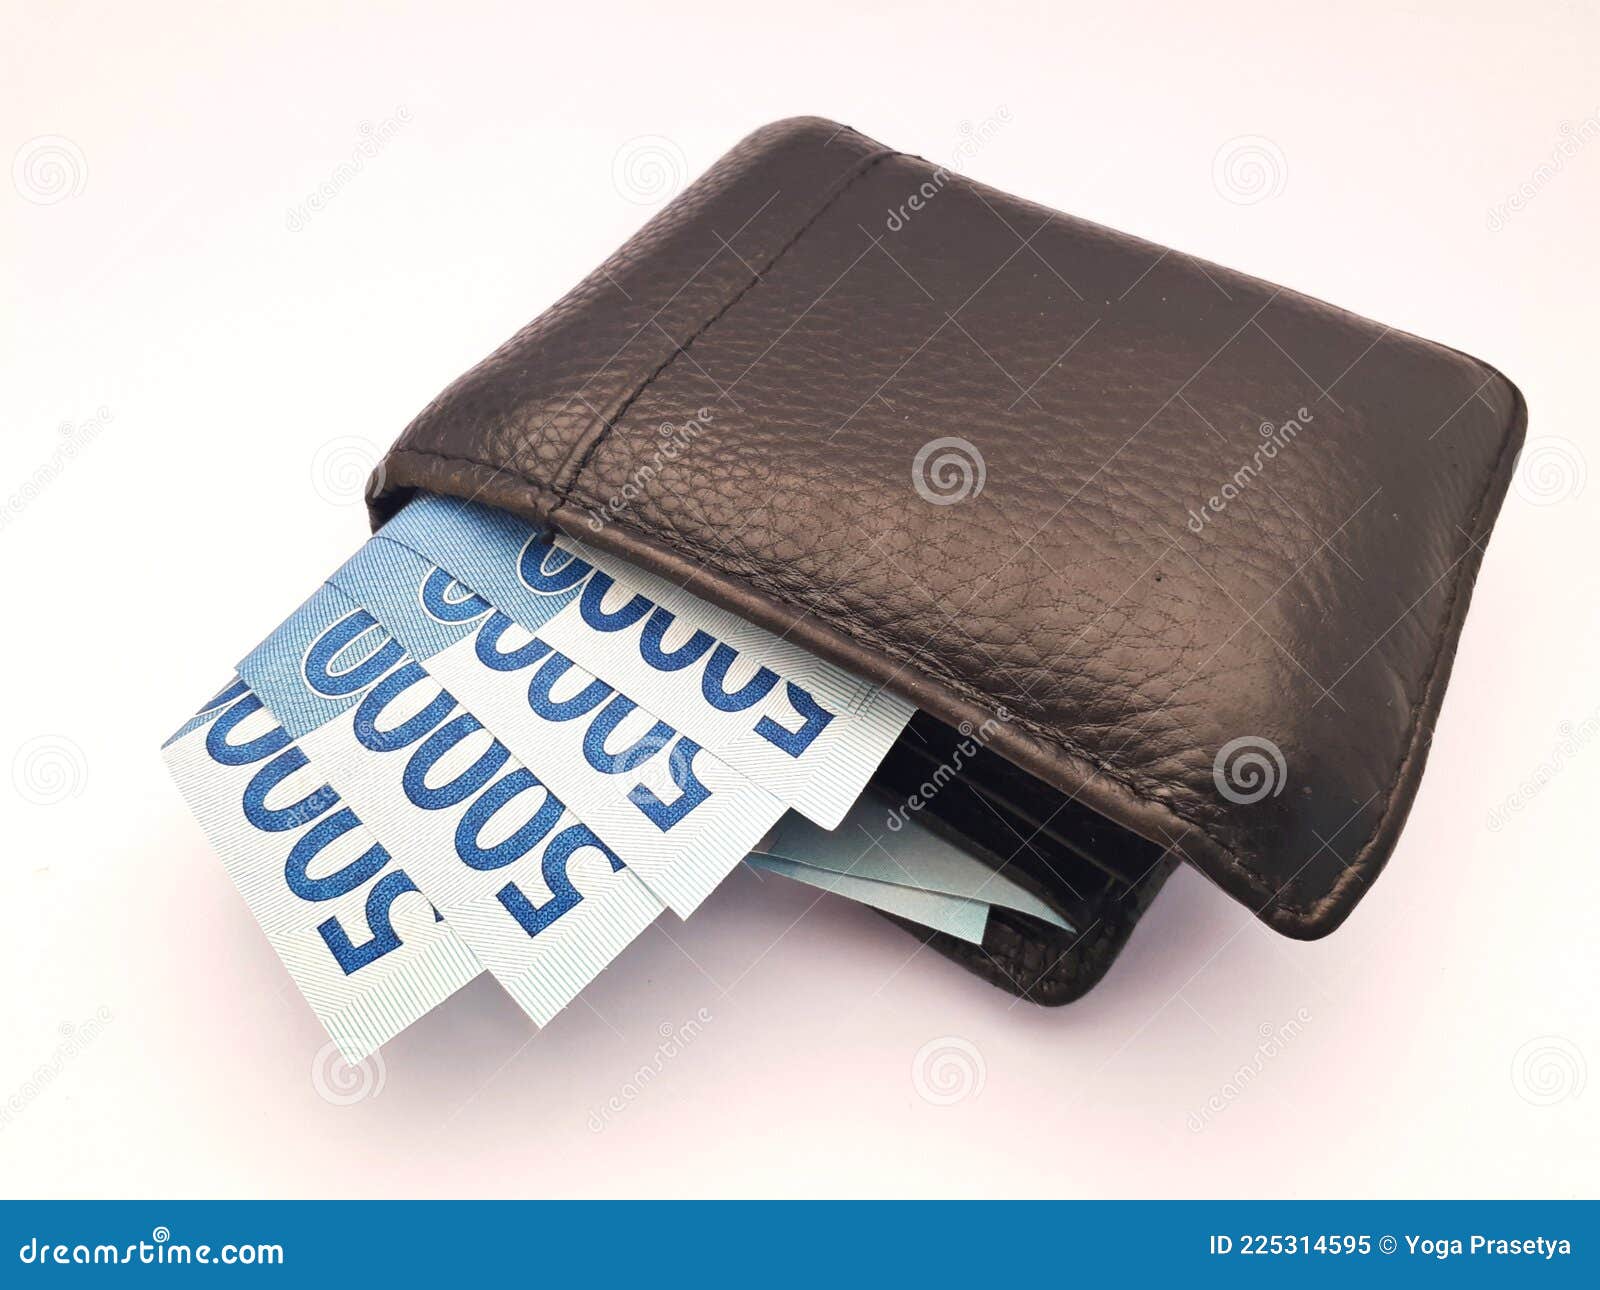 A Wallet Containing Several Pieces of 50 Thousand Rupiah Denominations ...